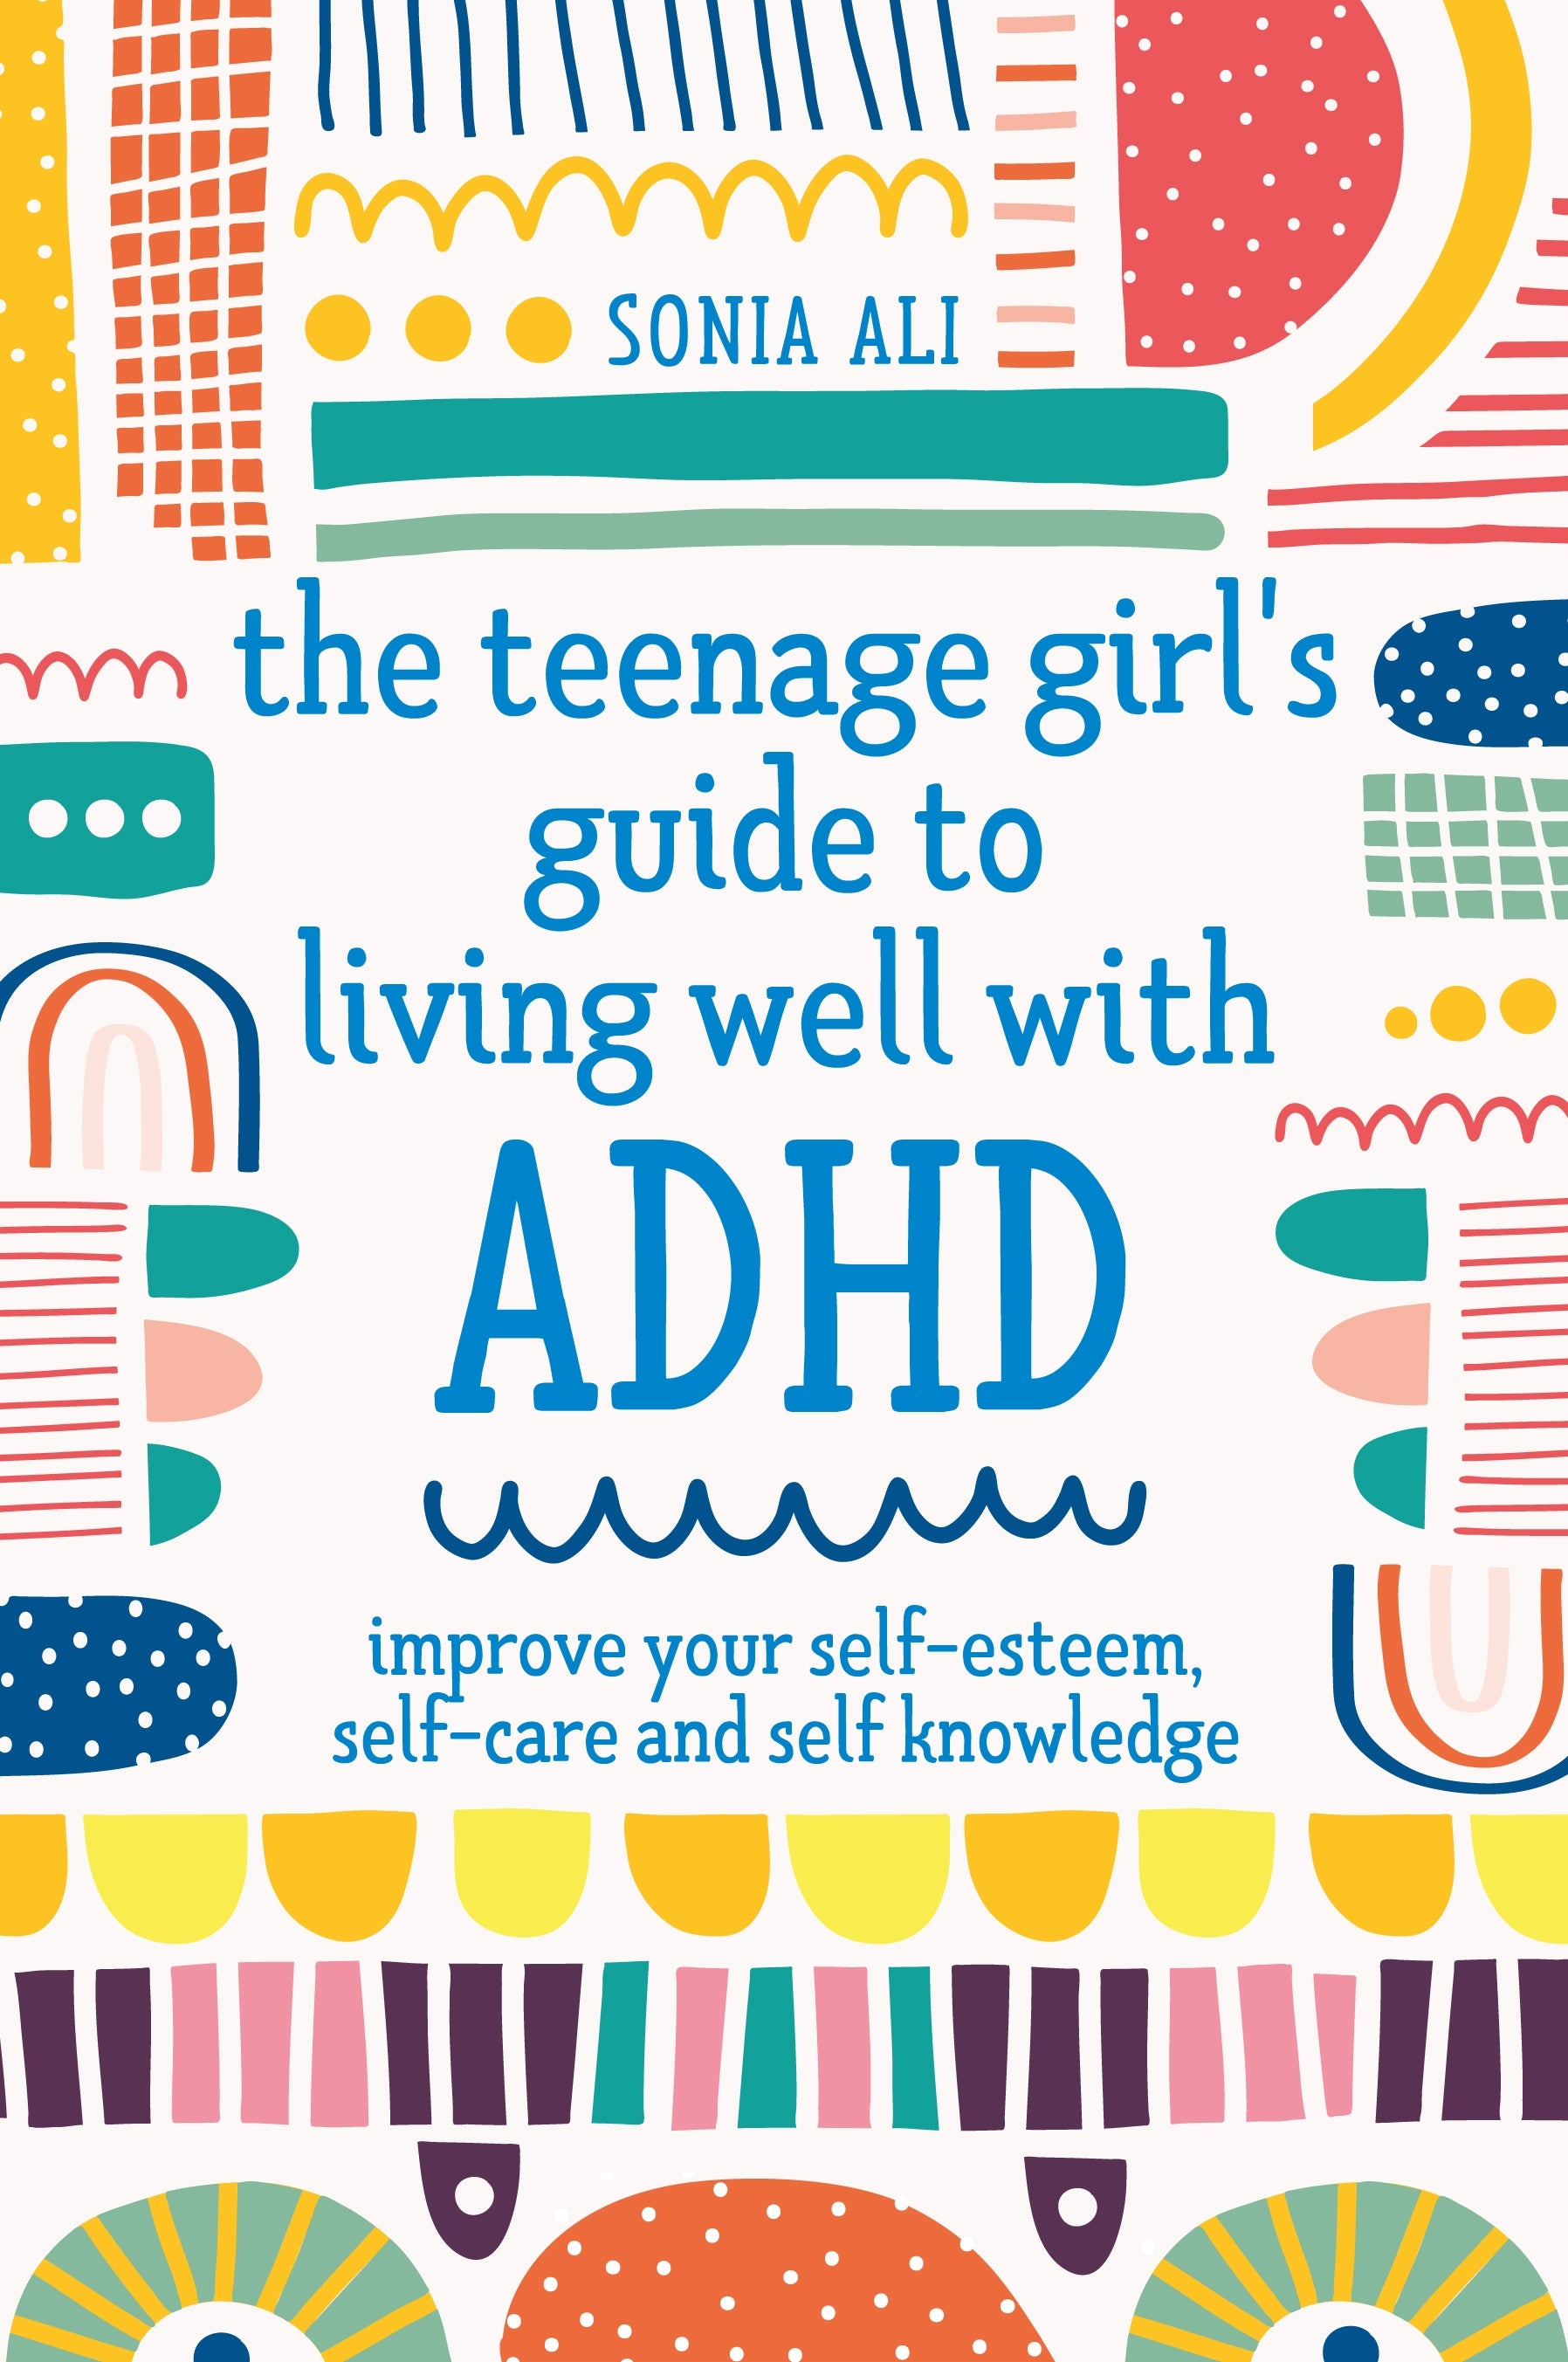 The Teenage Girl's Guide to Living Well with ADHD by Sonia Ali